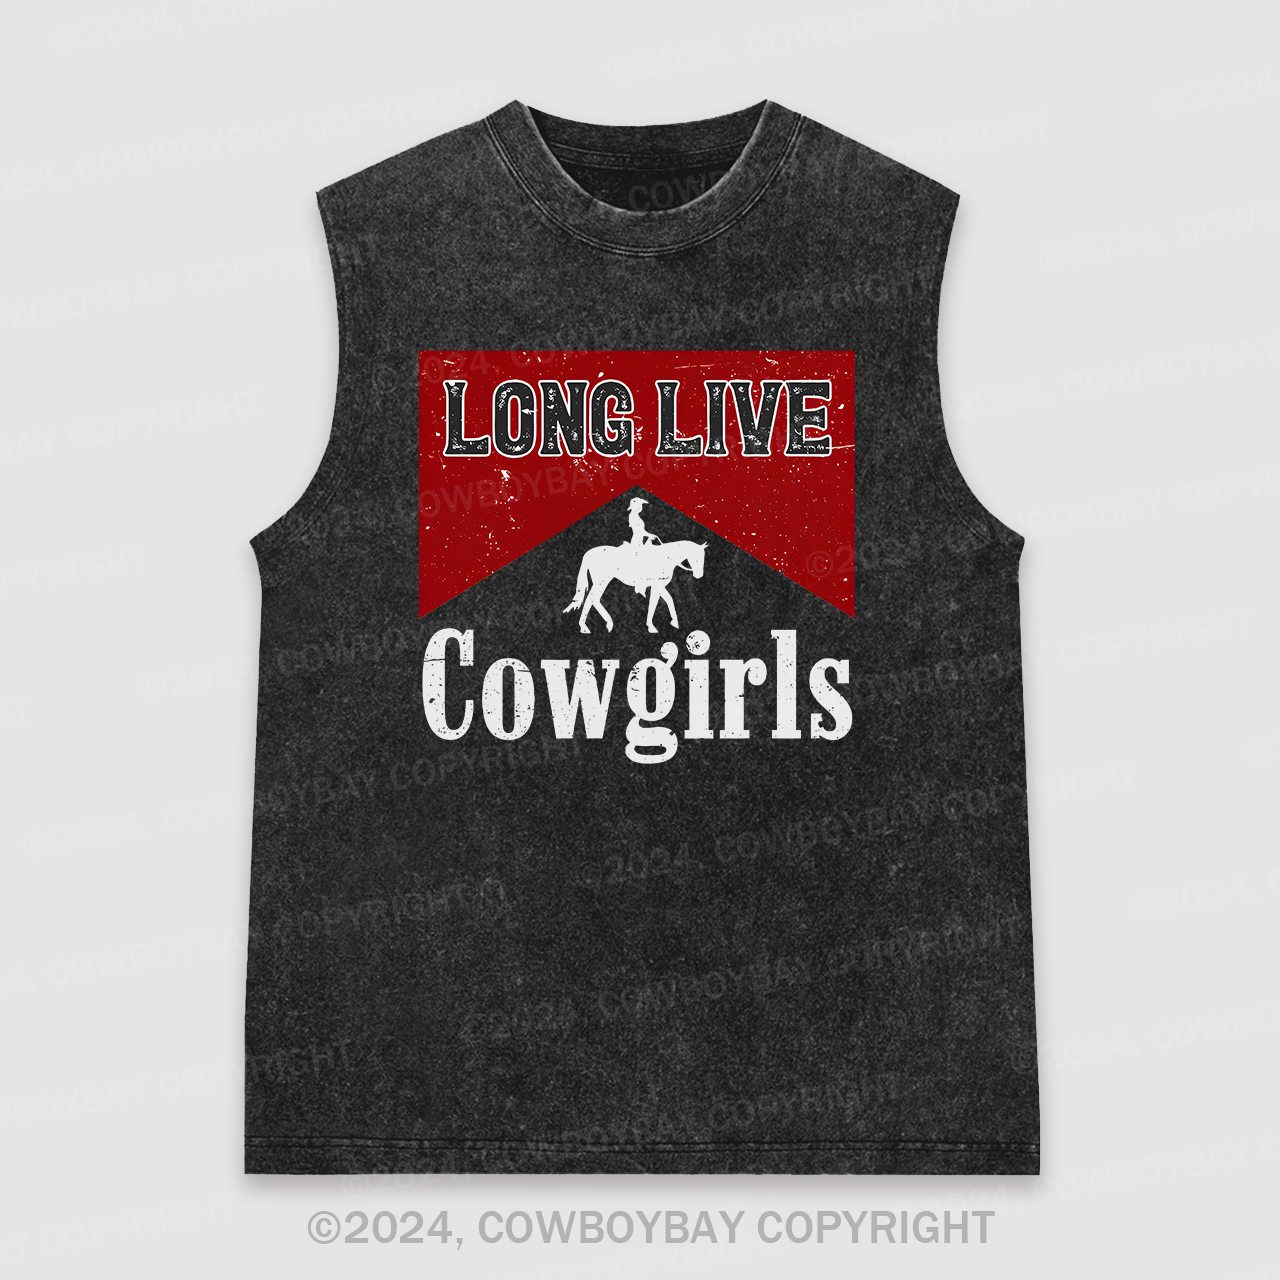 Long Live Cowgirls Printed Washed Tanks